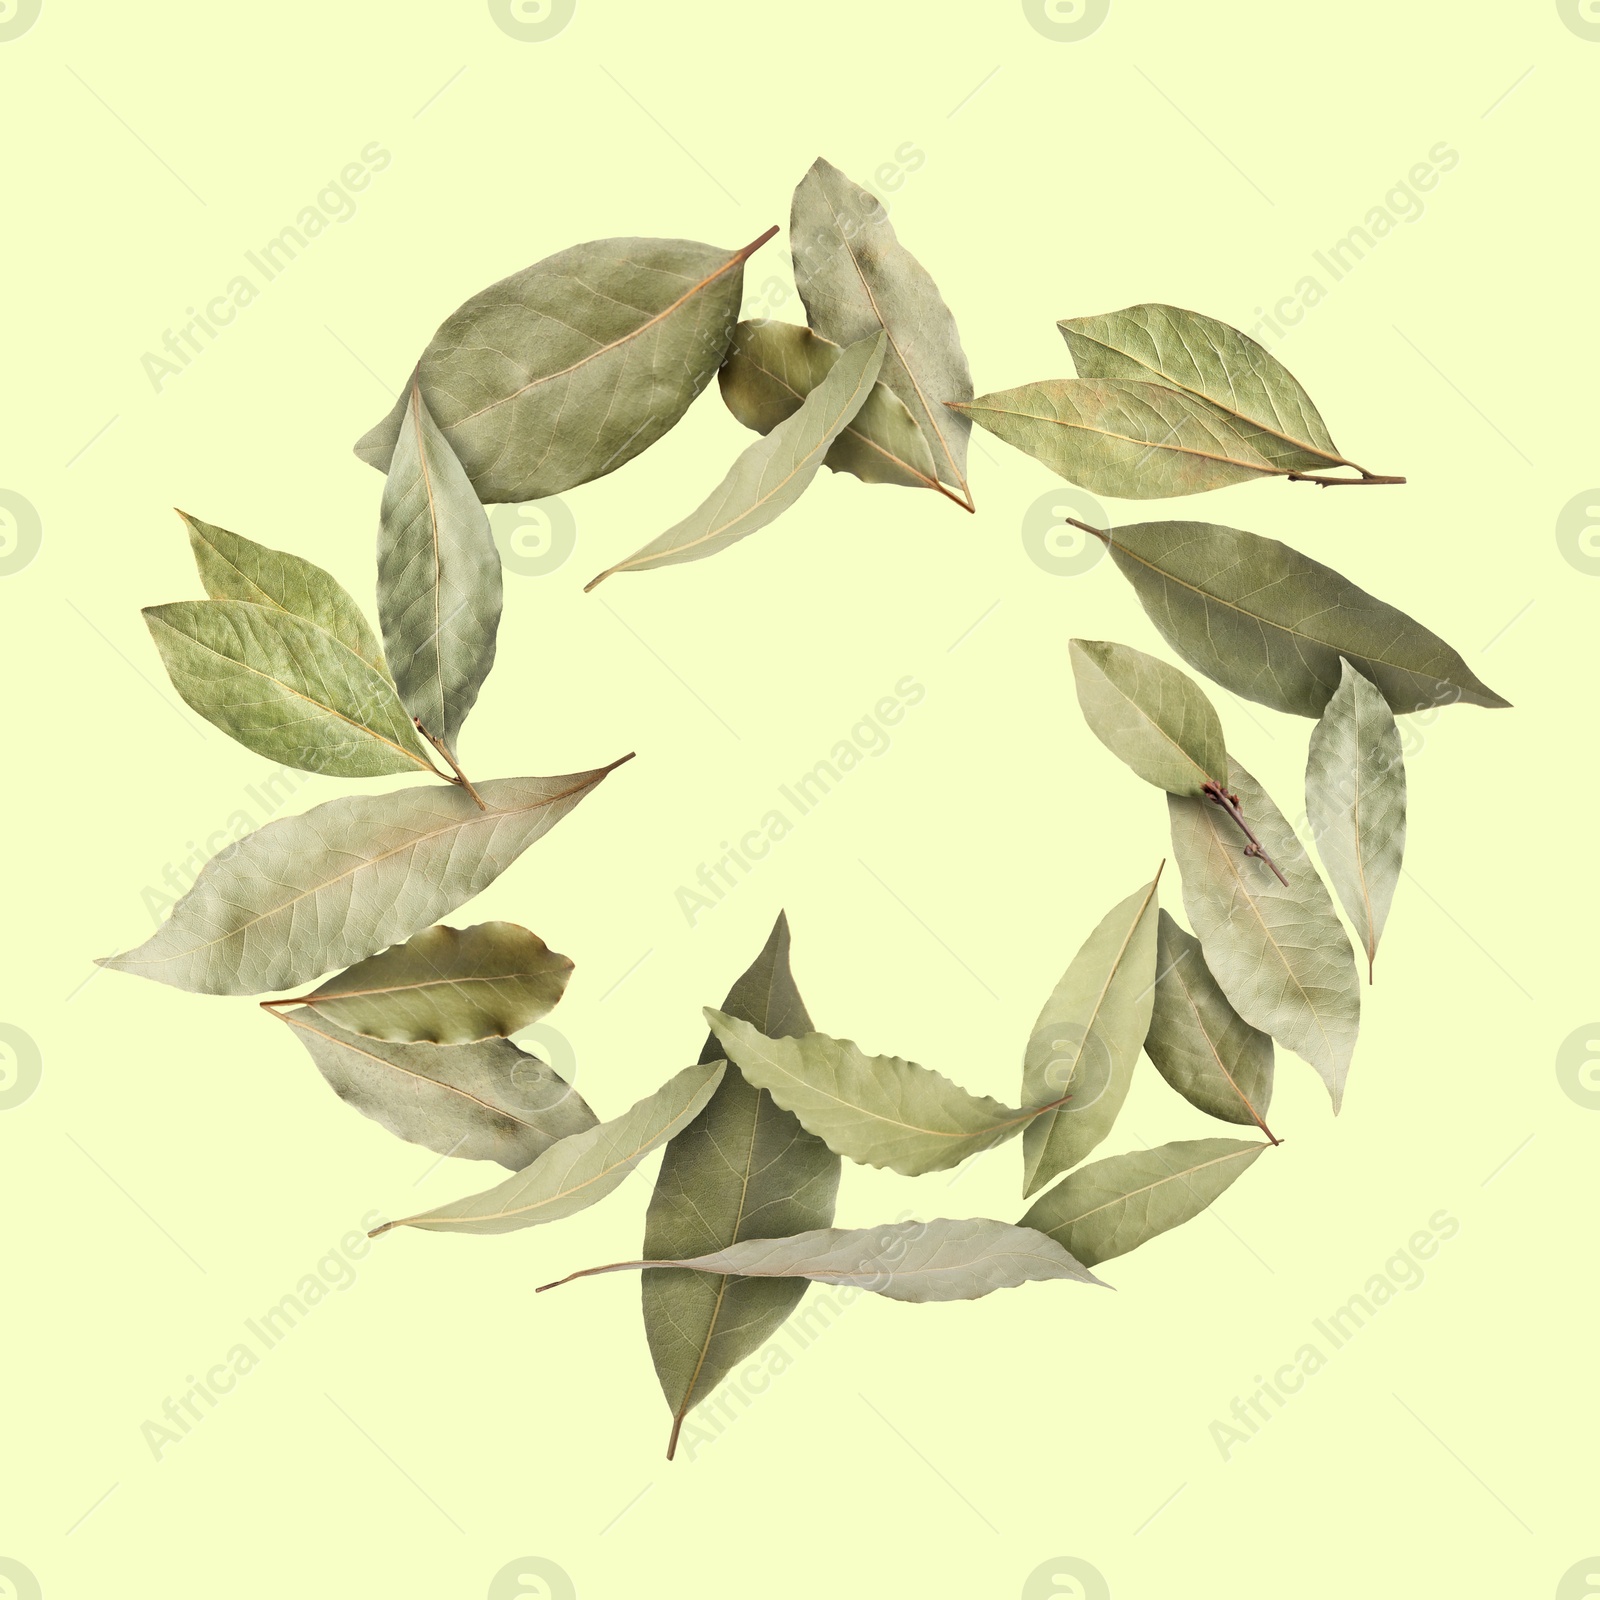 Image of Dry bay leaves falling on pale light yellow background